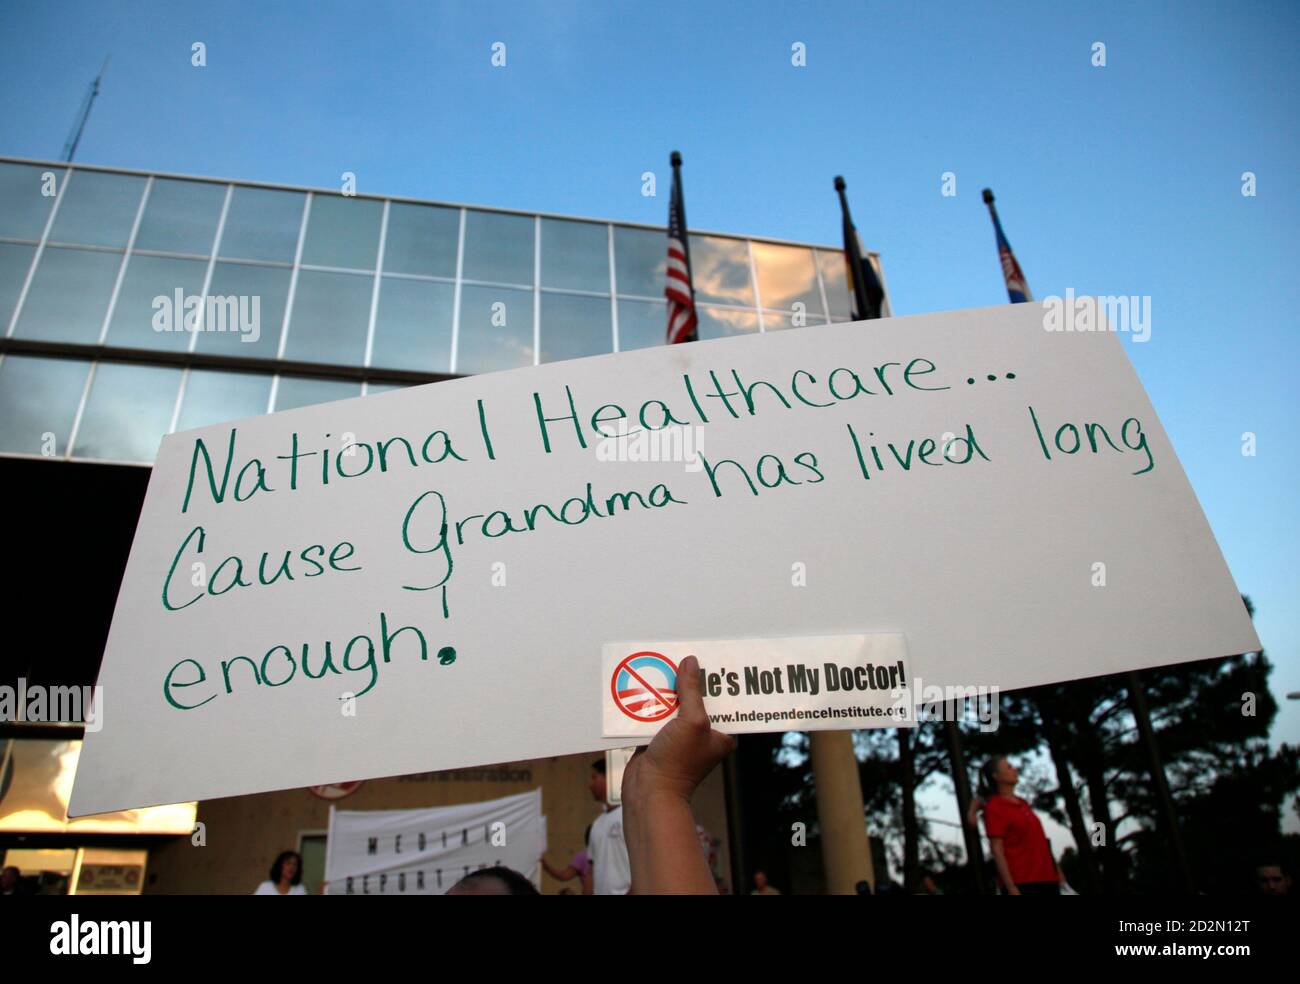 A demonstrator holds up a sign outside a town hall meeting on healthcare reform hosted by Rep. Mike Coffman (R-CO) in Littleton, Colorado August 12, 2009. REUTERS/Rick Wilking (UNITED STATES POLITICS HEALTH) Stock Photo